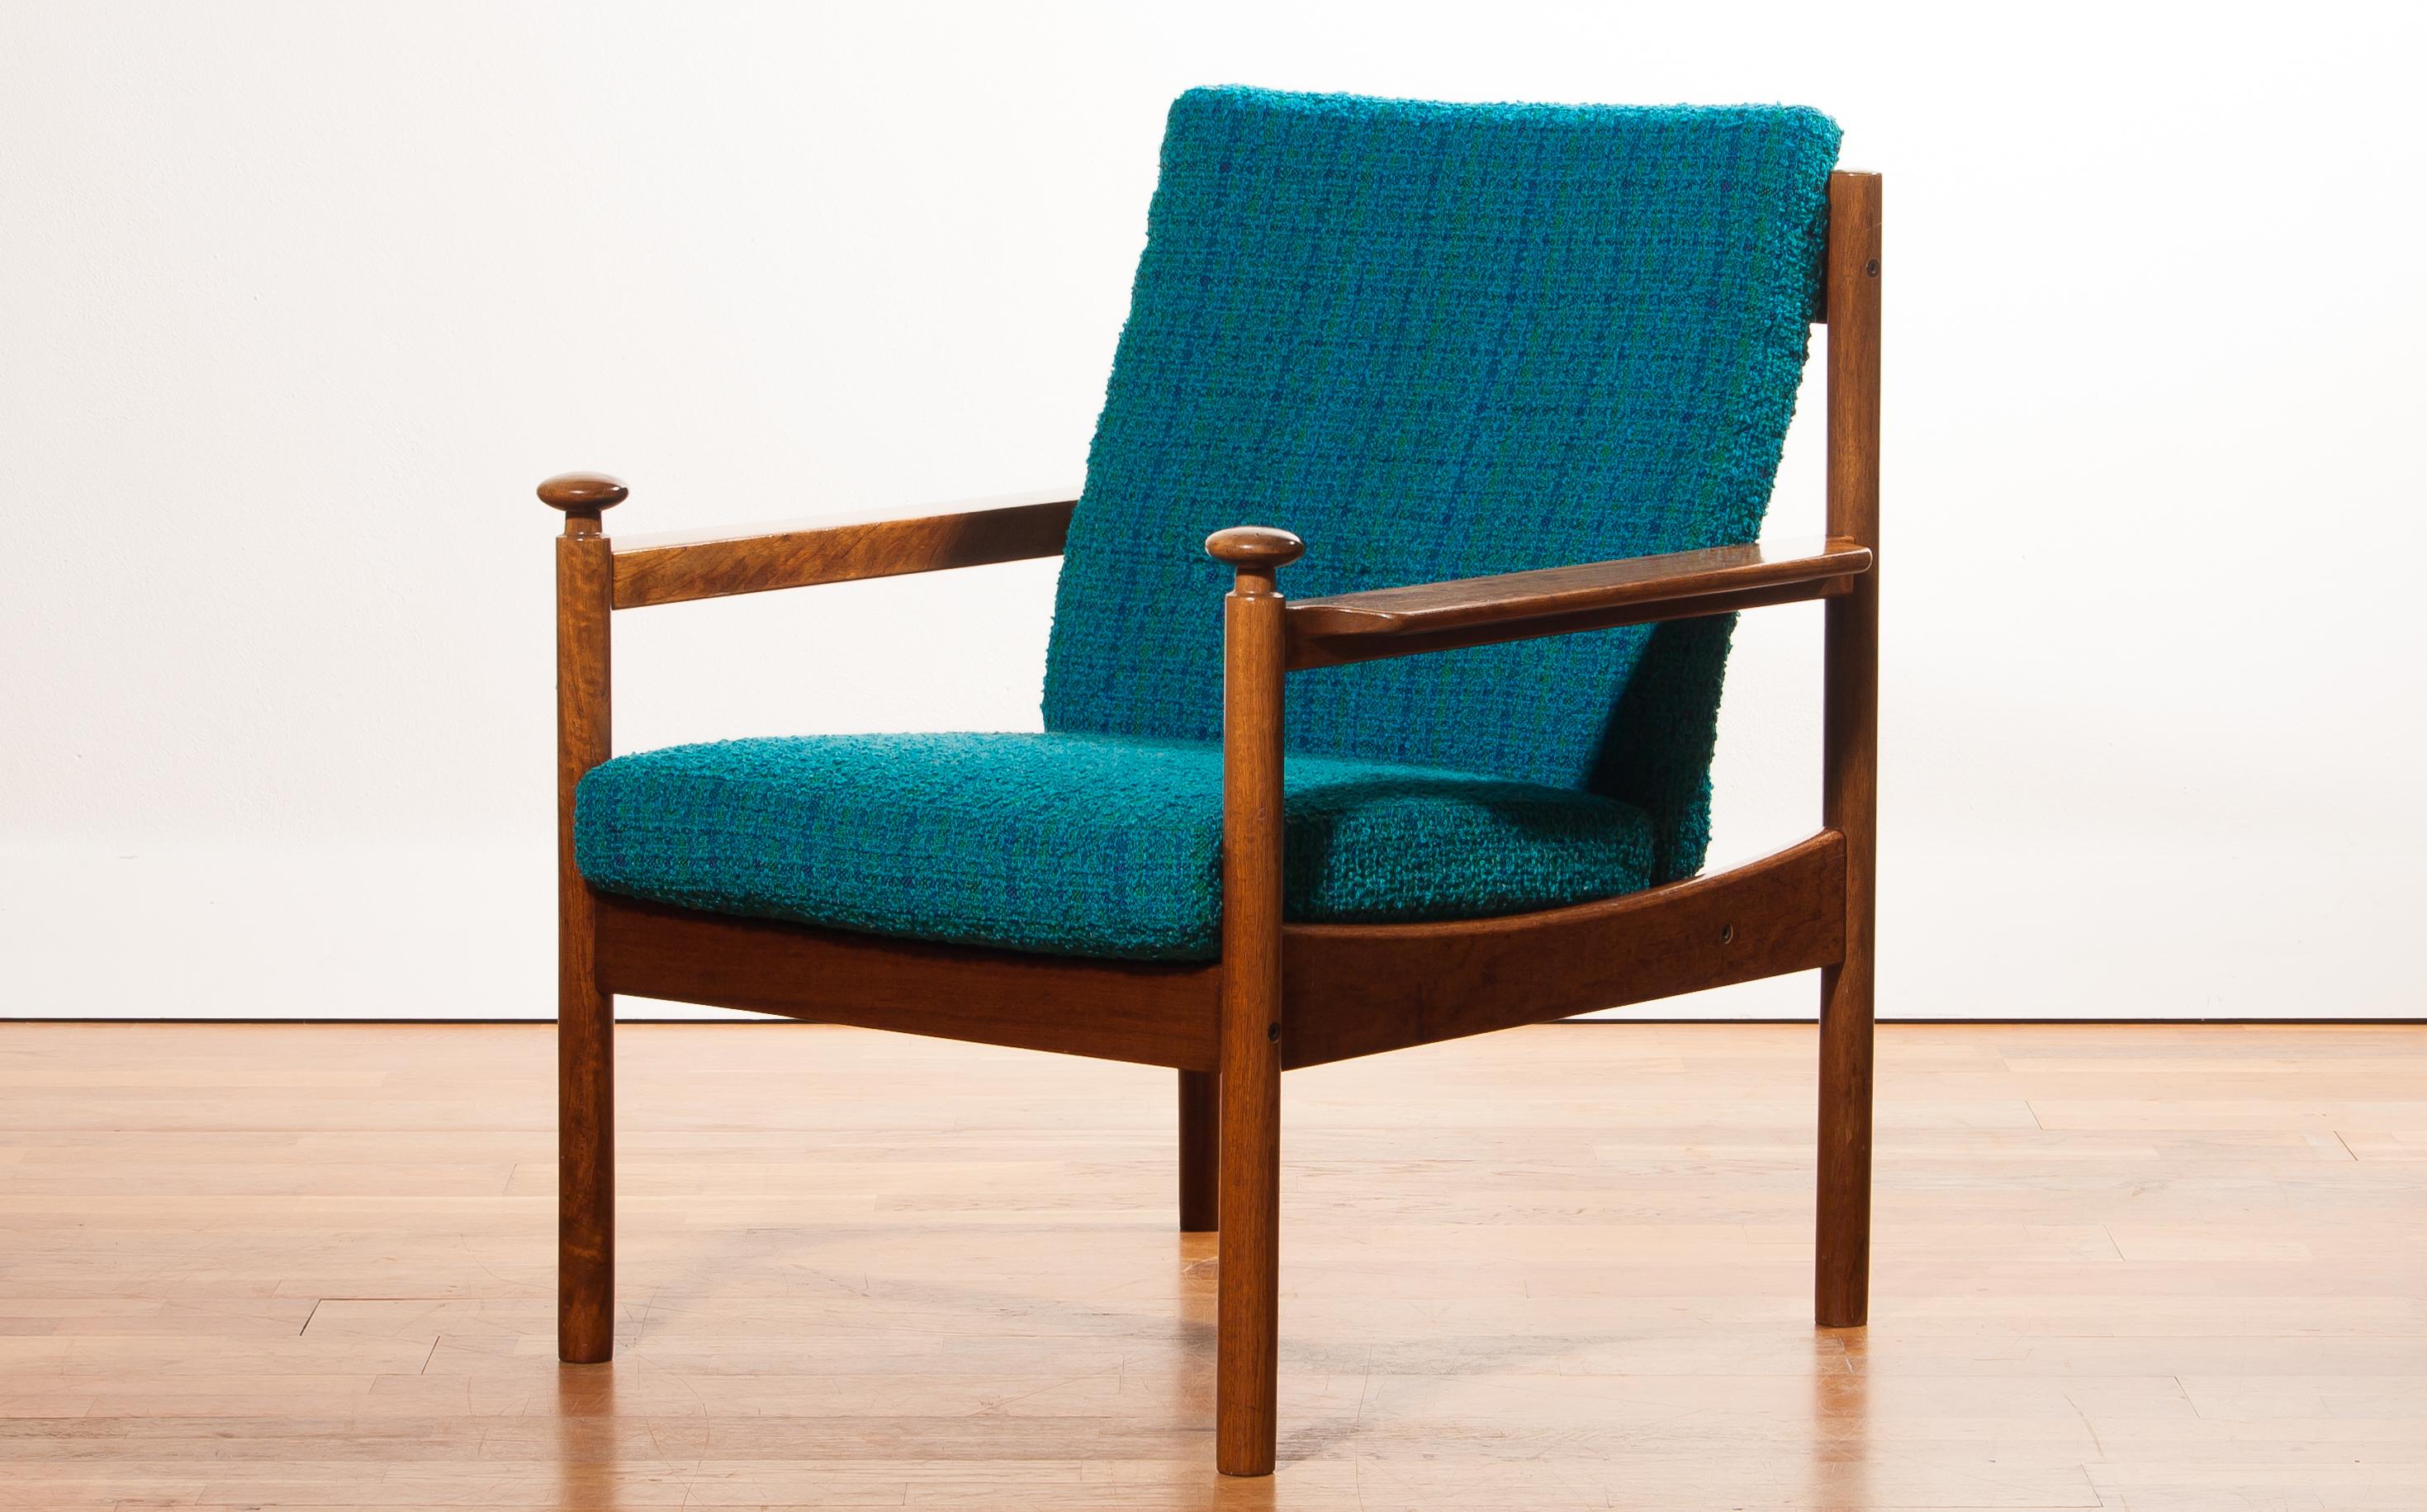 Beautiful chair designed by Torbjørn Afdal for Sandvik & Co. Mobler, Norway.
The wooden frame with the blue fabric cushions makes it a very nice combination.
The condition is good, wear consistent with age and use.
Period 1950s
Dimensions: H 83